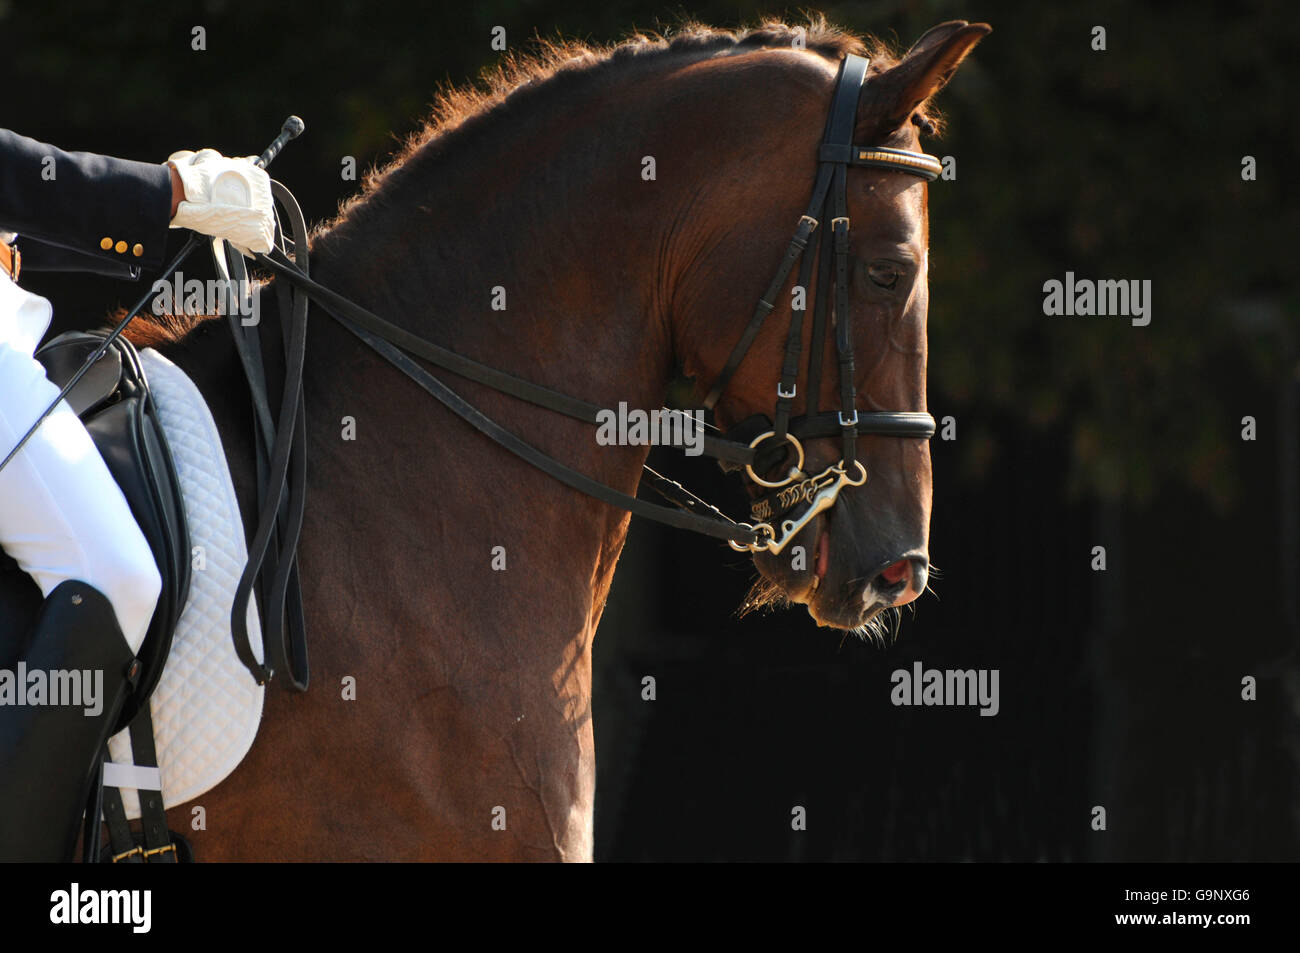 Dressage / curb bit, braided mane, double reins, cavesson noseband, side Stock Photo